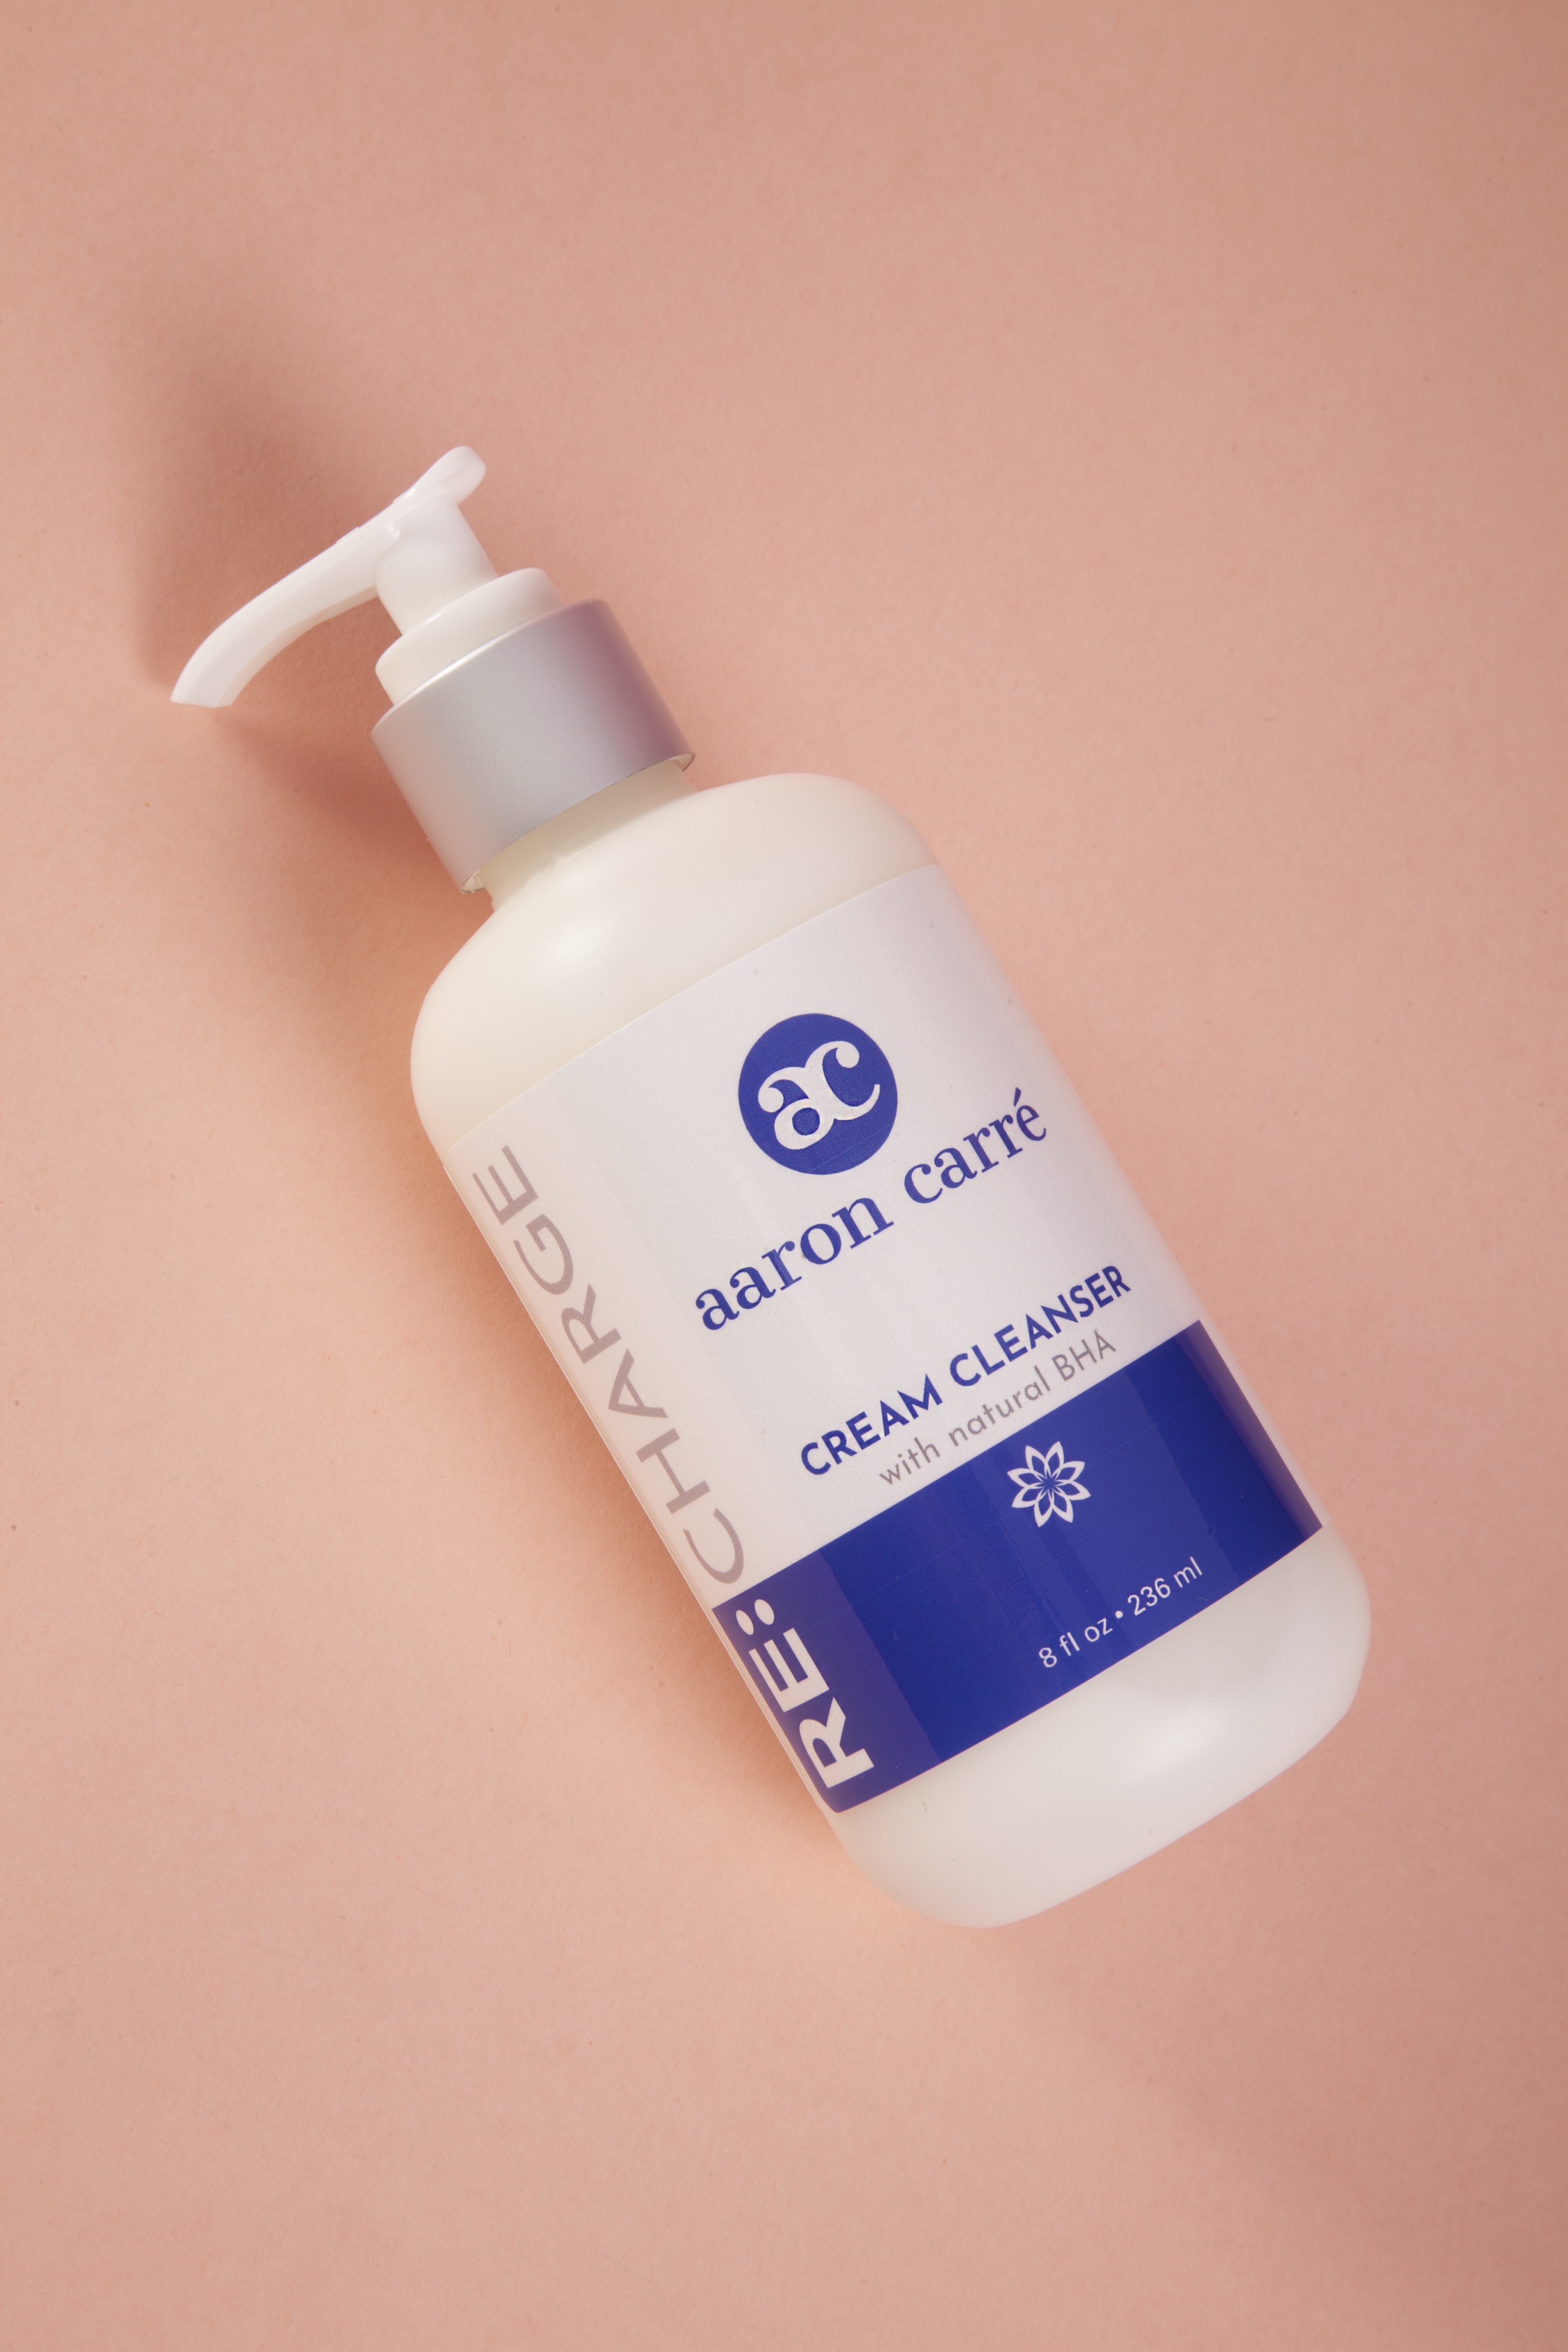 Aaron Carre Re:Charge Cream Cleanser